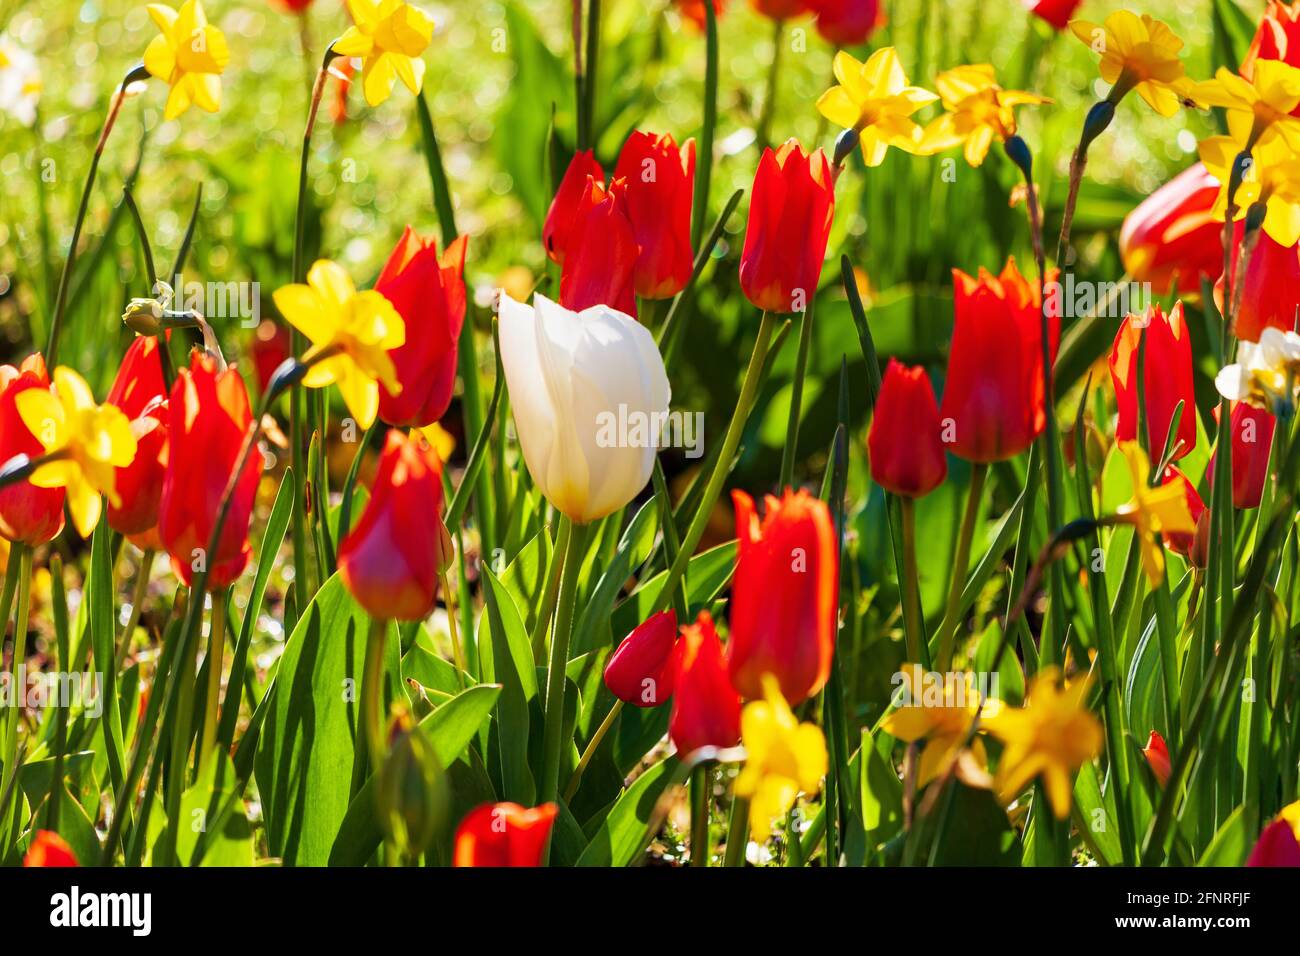 Beautiful blooming flower bed with red and white tulips and yellow daffodils on a sunny springtime day Stock Photo